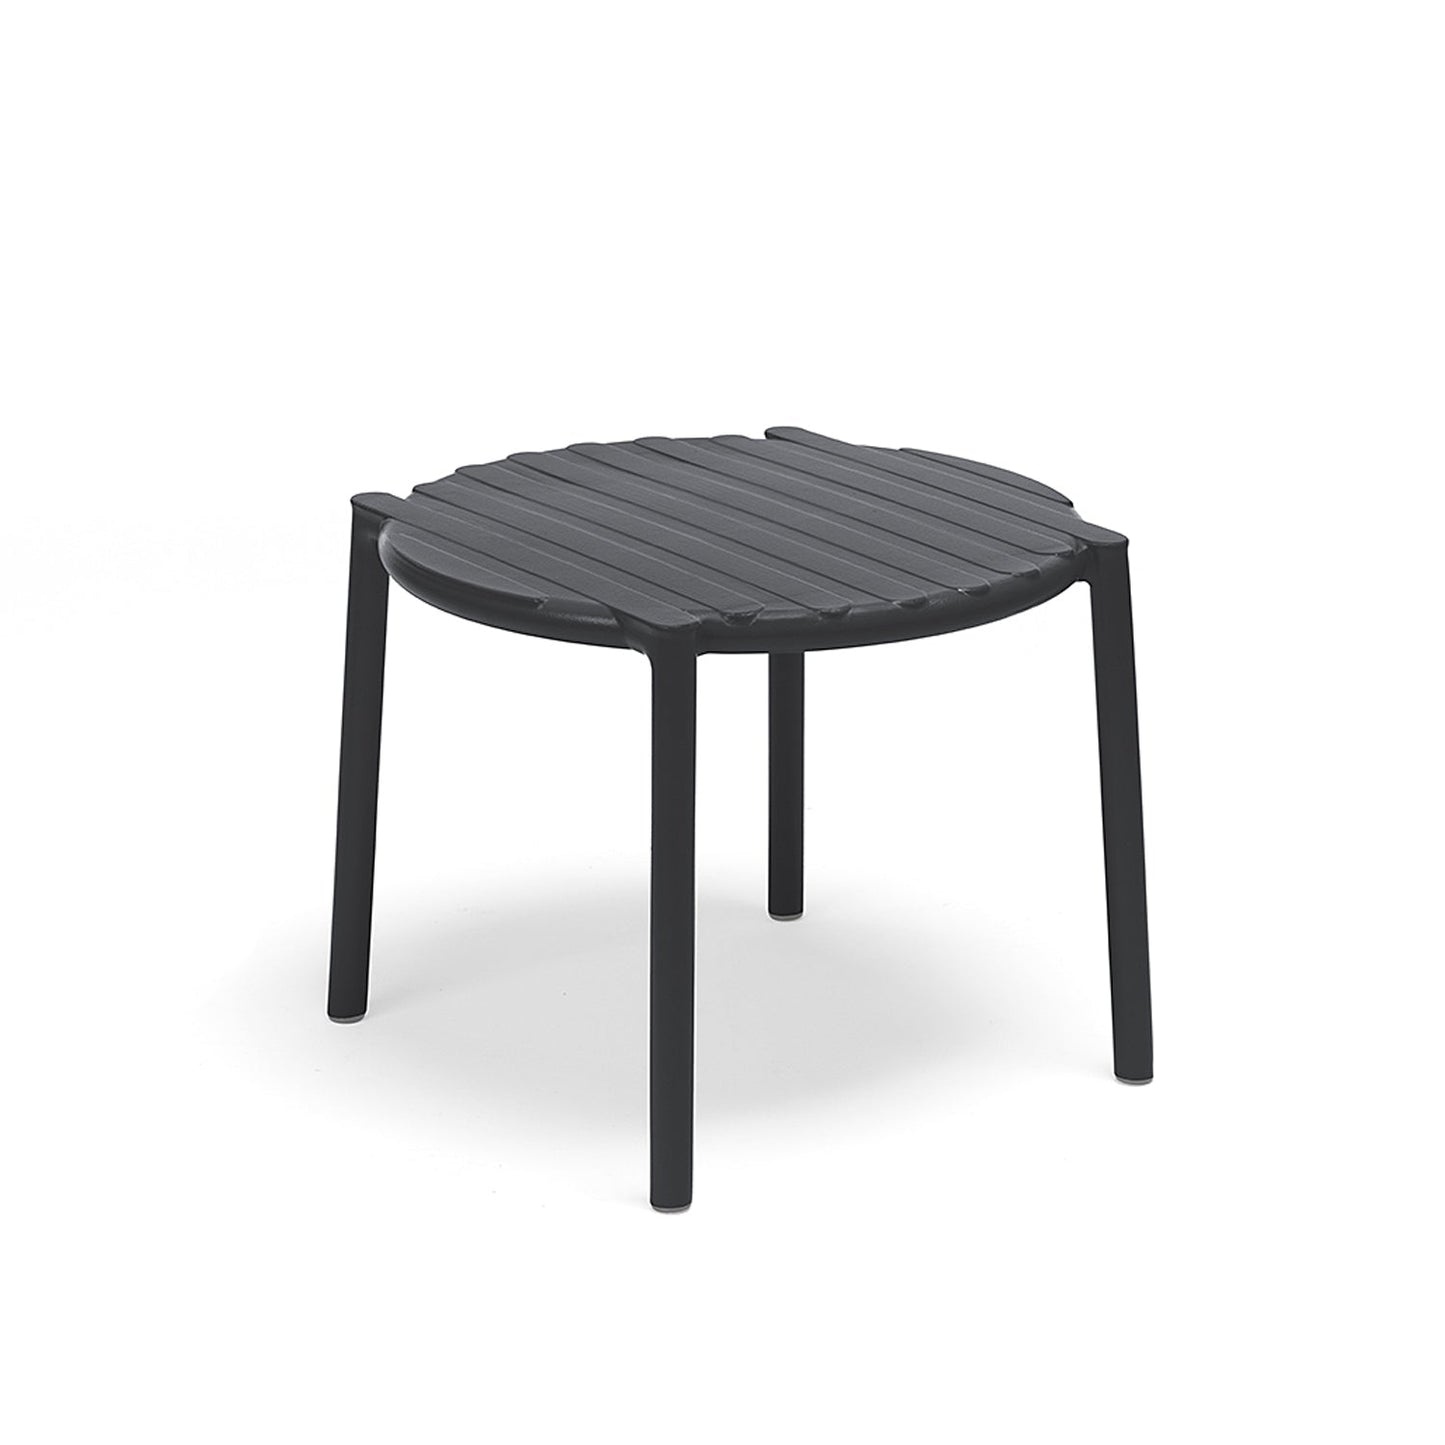 Doga Garden Table In Anthracite